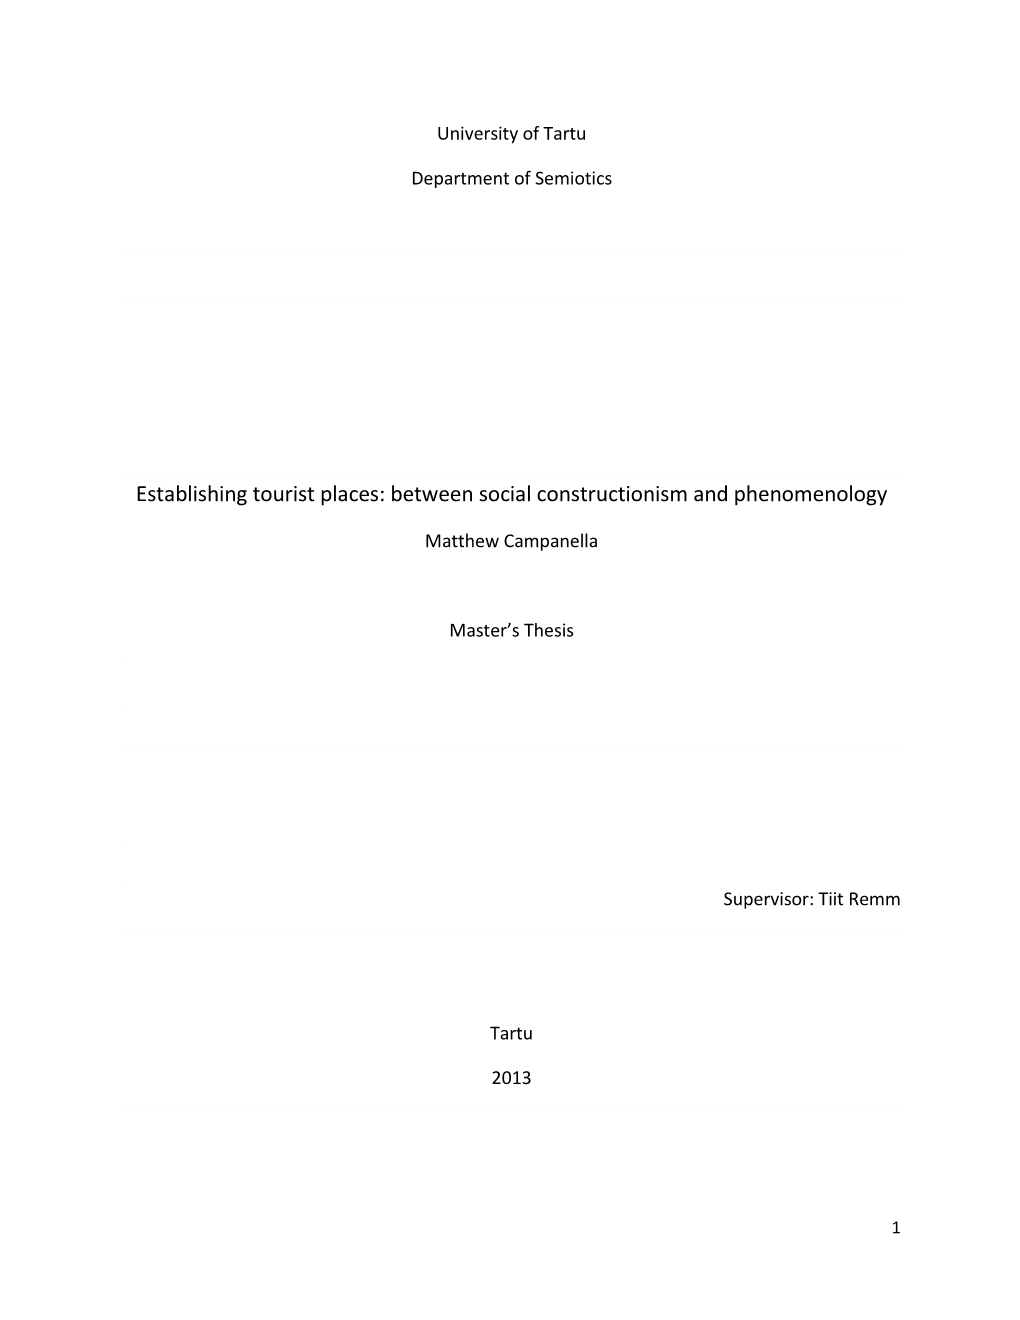 Establishing Tourist Places: Between Social Constructionism and Phenomenology